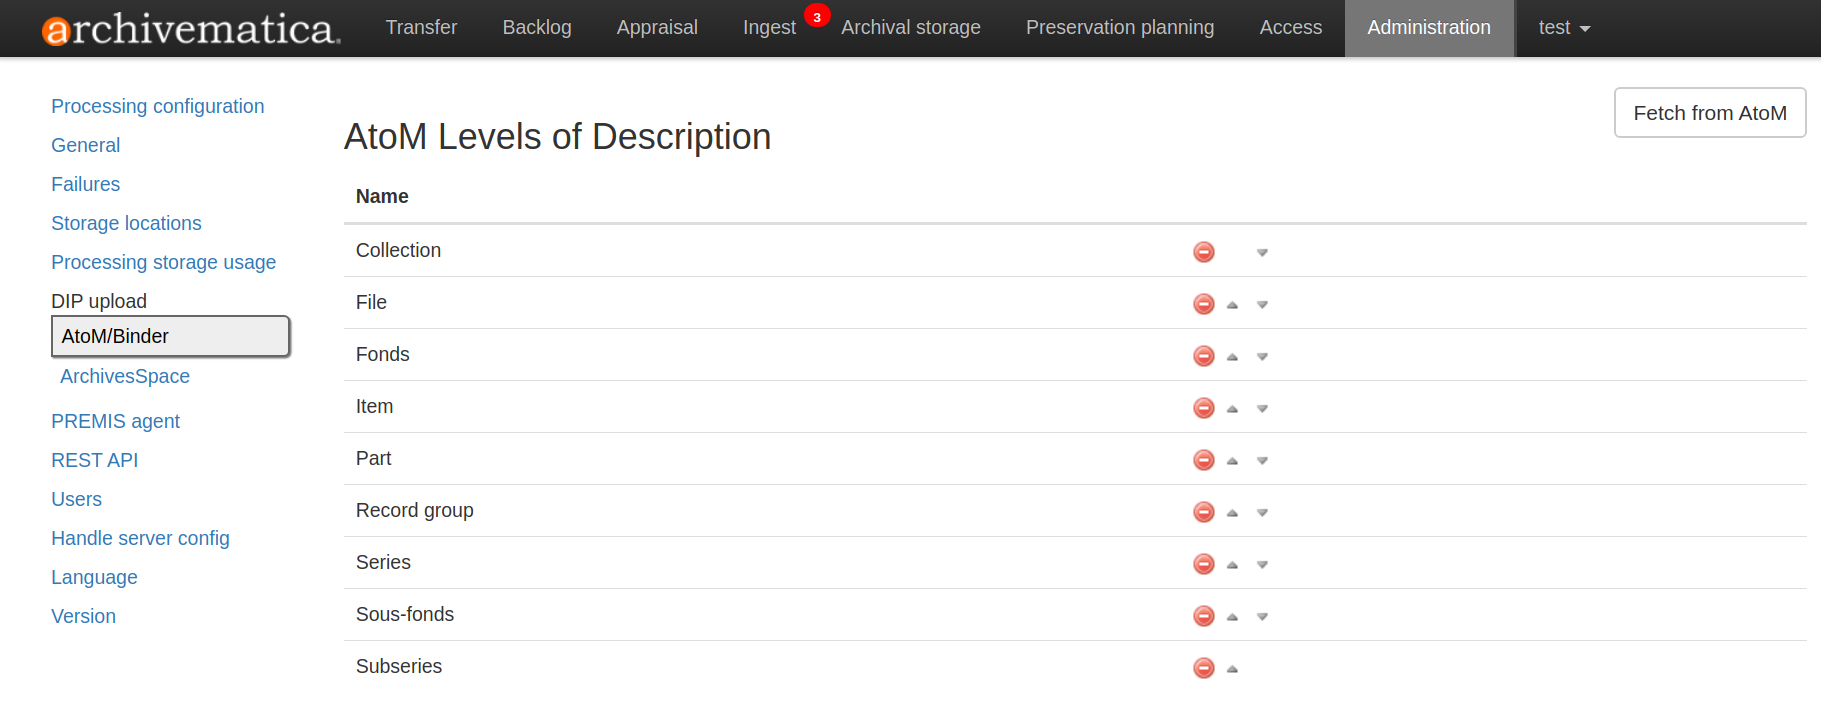 Levels of description from AtoM shown in Archivematica administration screen